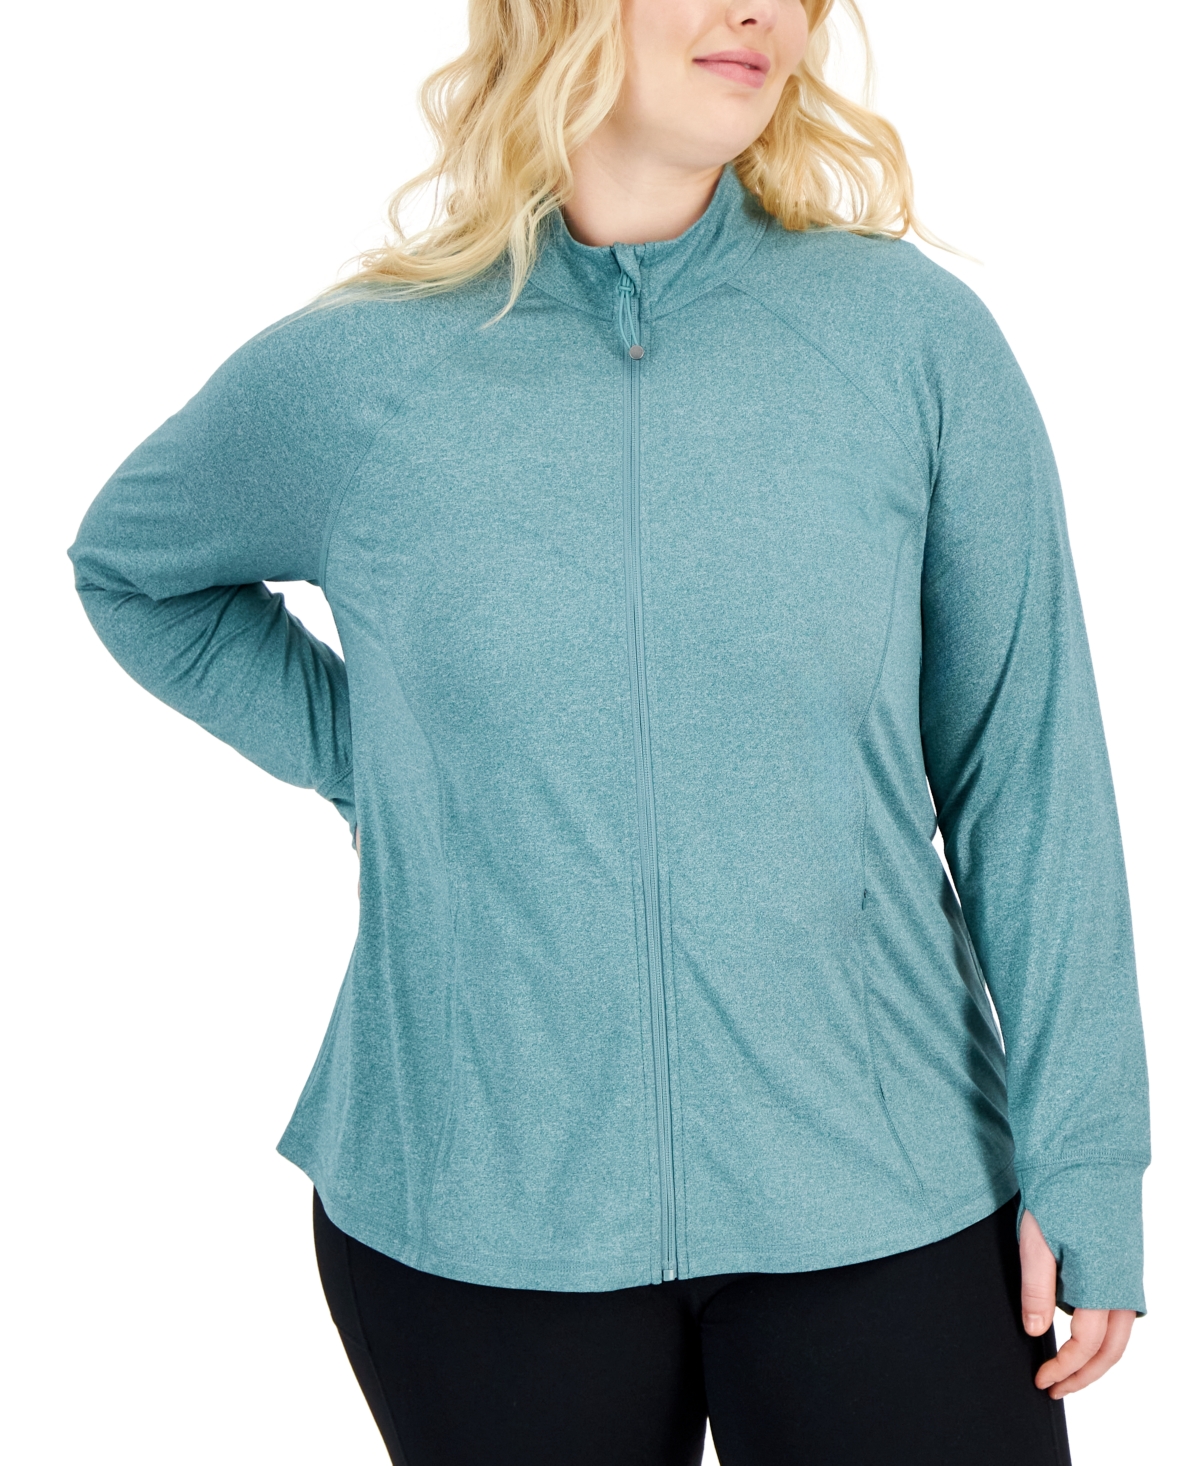 Plus Size Zip-Front Long Sleeve Jacket, Created for Macy's - Ocean Sight